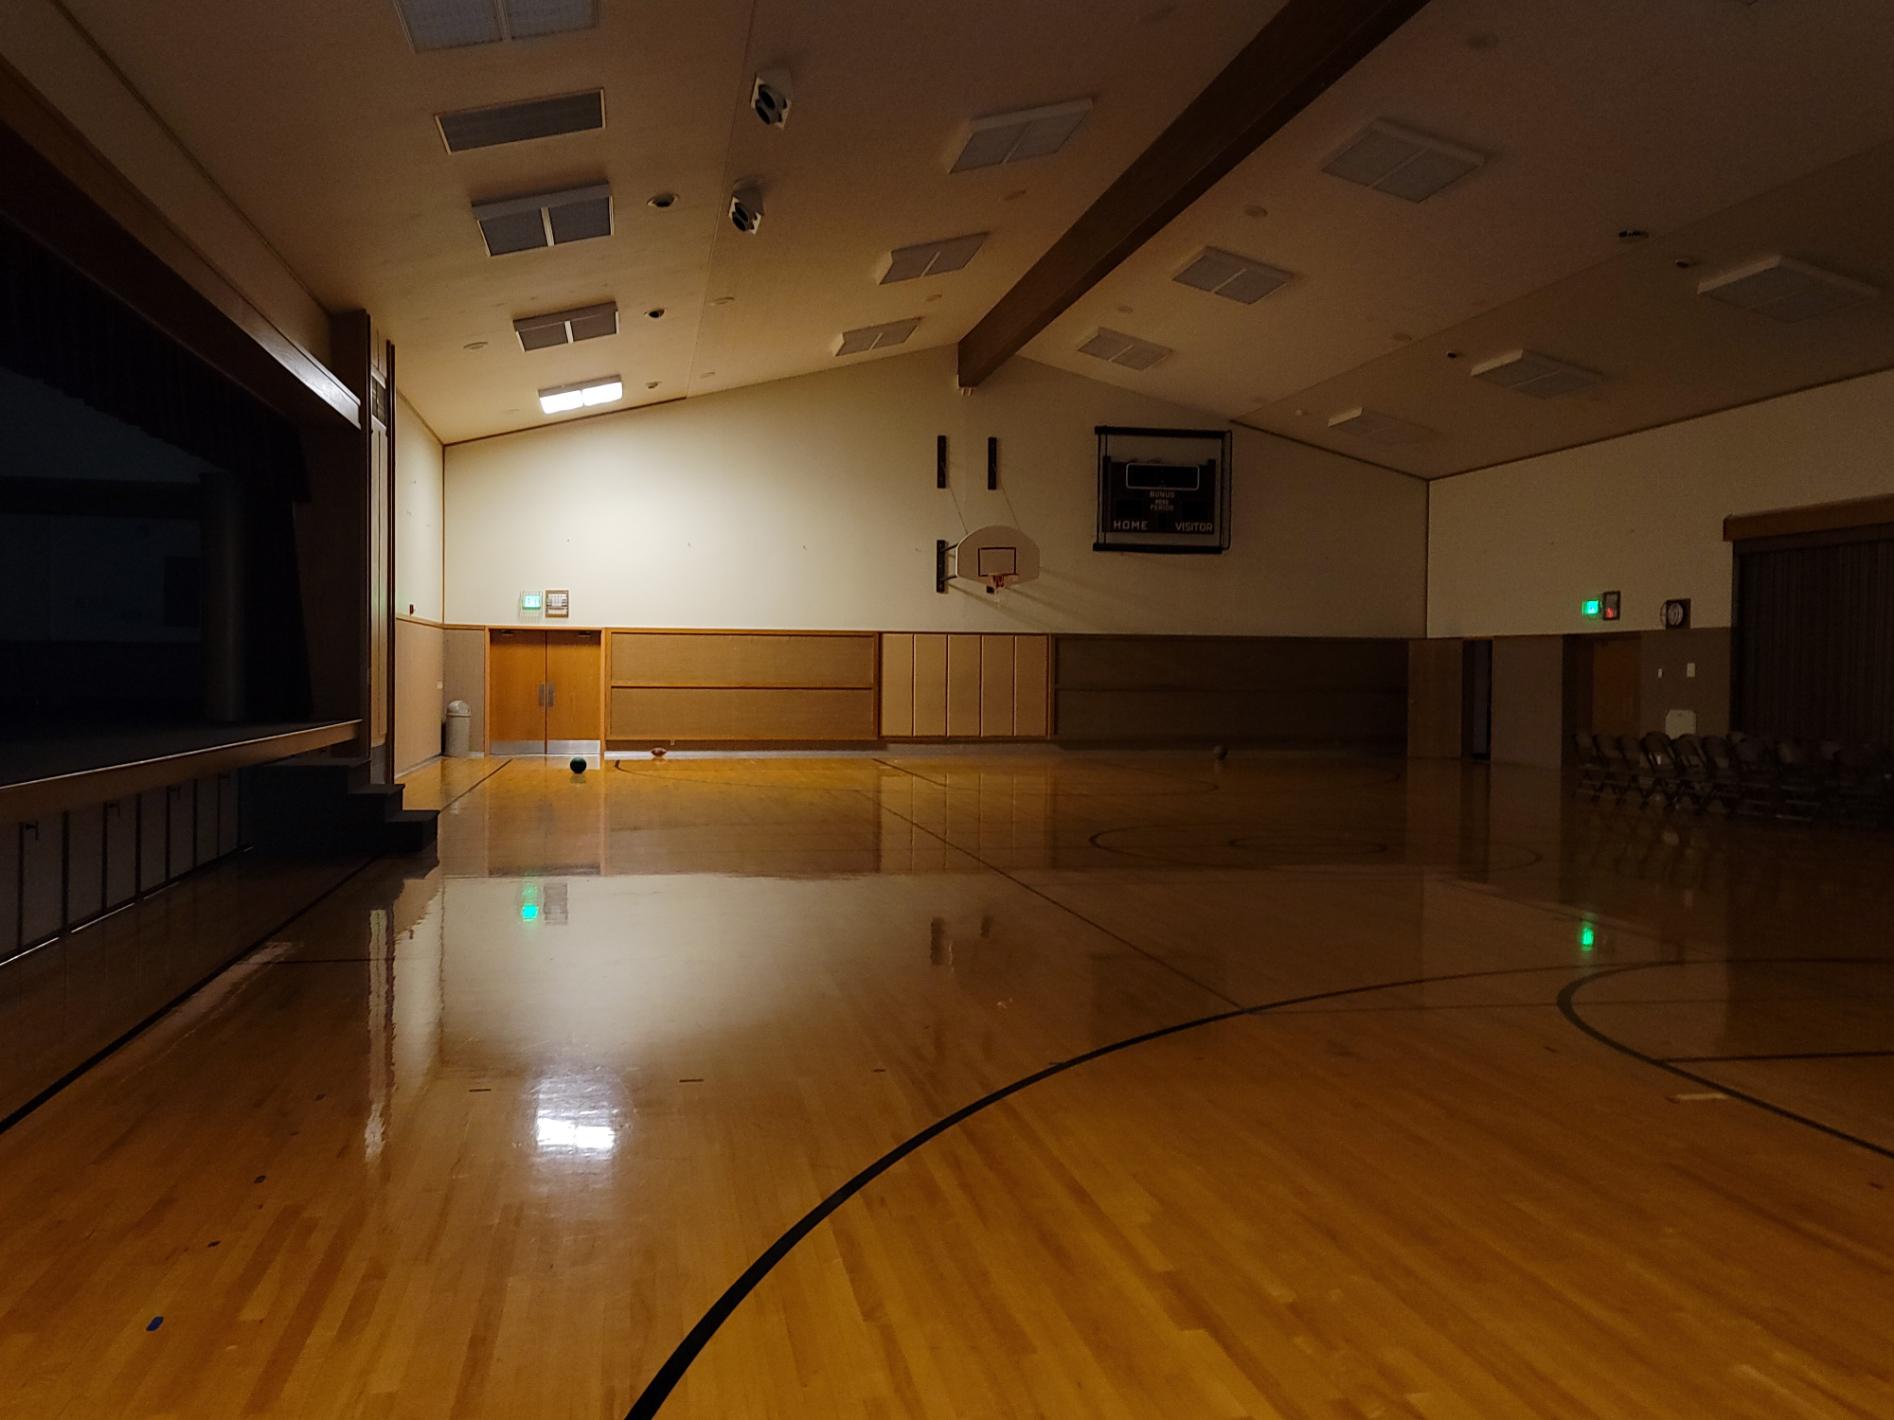 Gym, or cultural hall, of The Church of Jesus Christ of Latter-day Saints